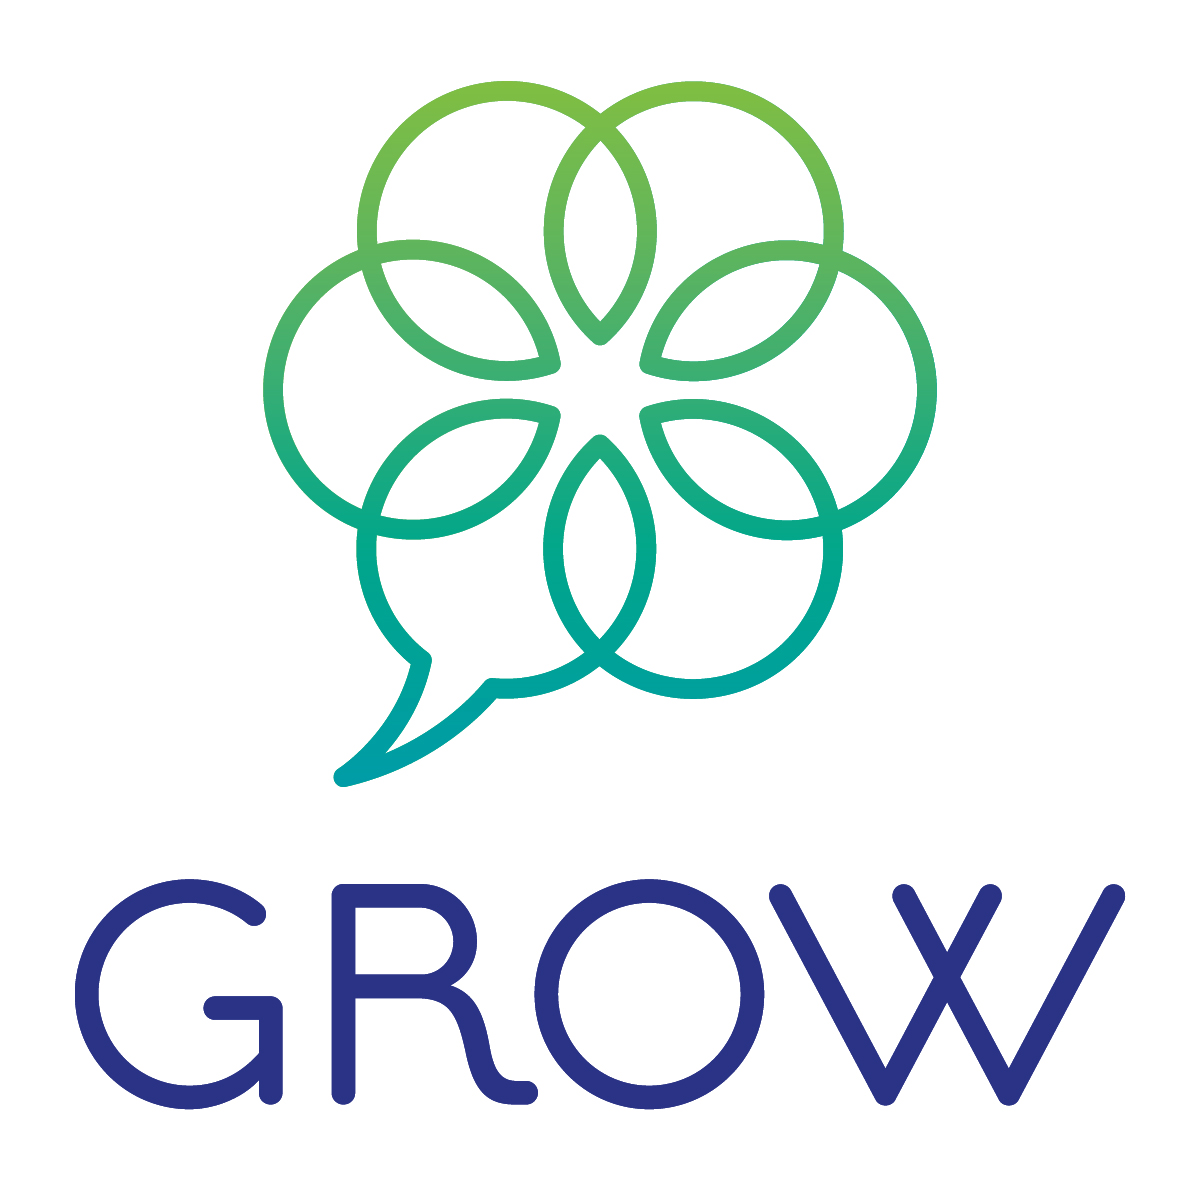 GROW logo logo design by logo designer Cause Design Co. for your inspiration and for the worlds largest logo competition